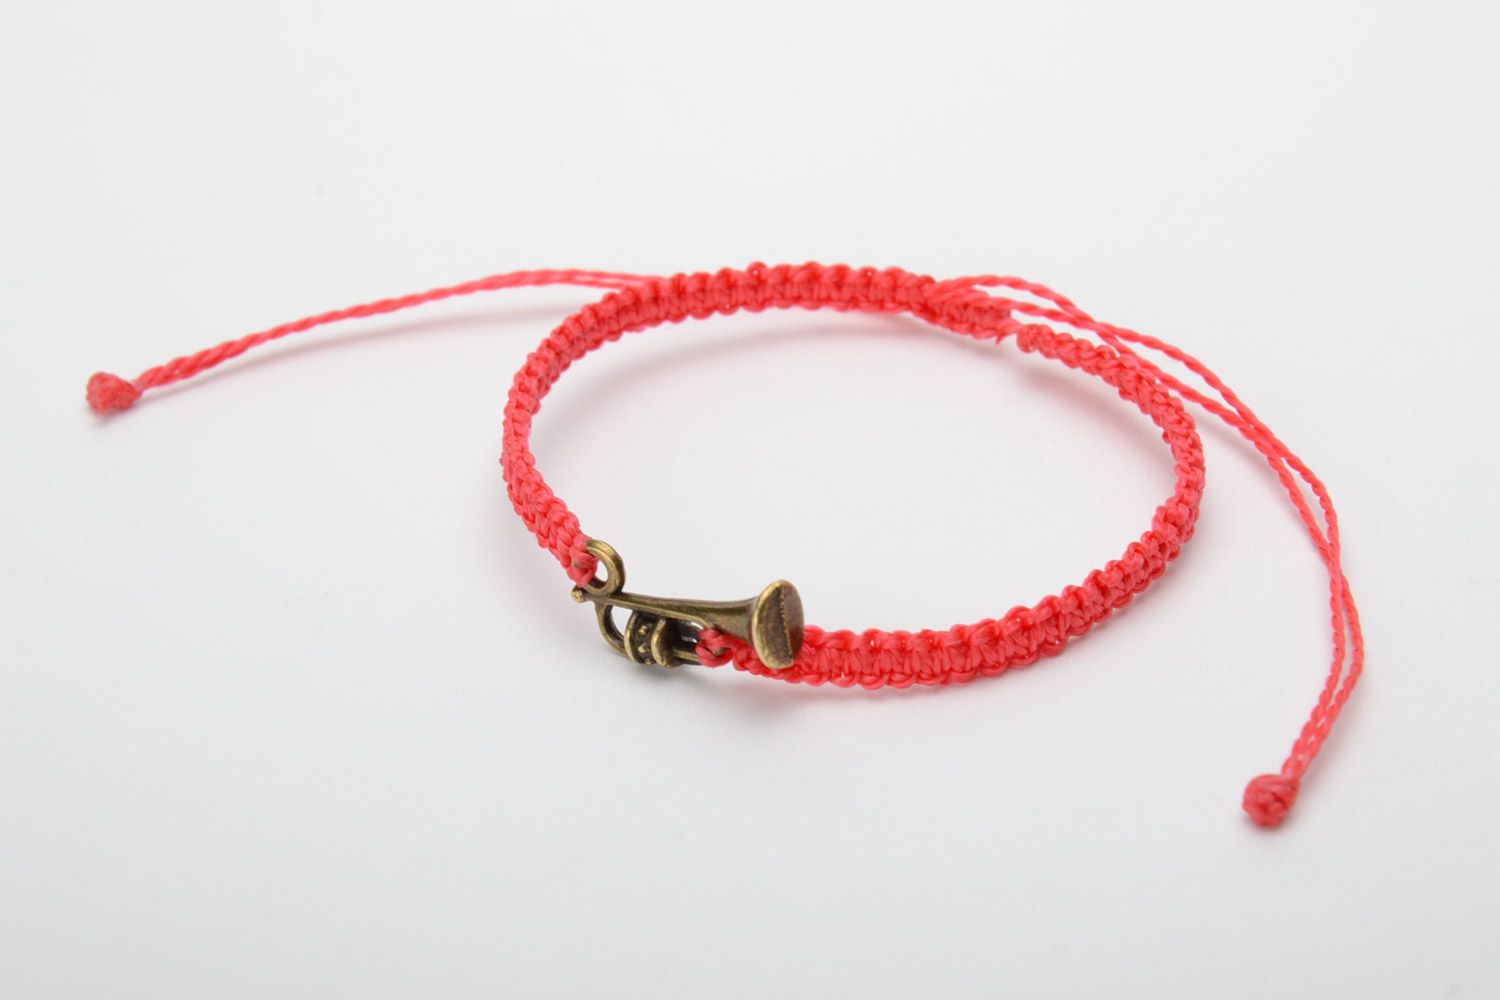 Handmade red woven capron thread bracelet with metal charm in the shape of saxophone photo 3